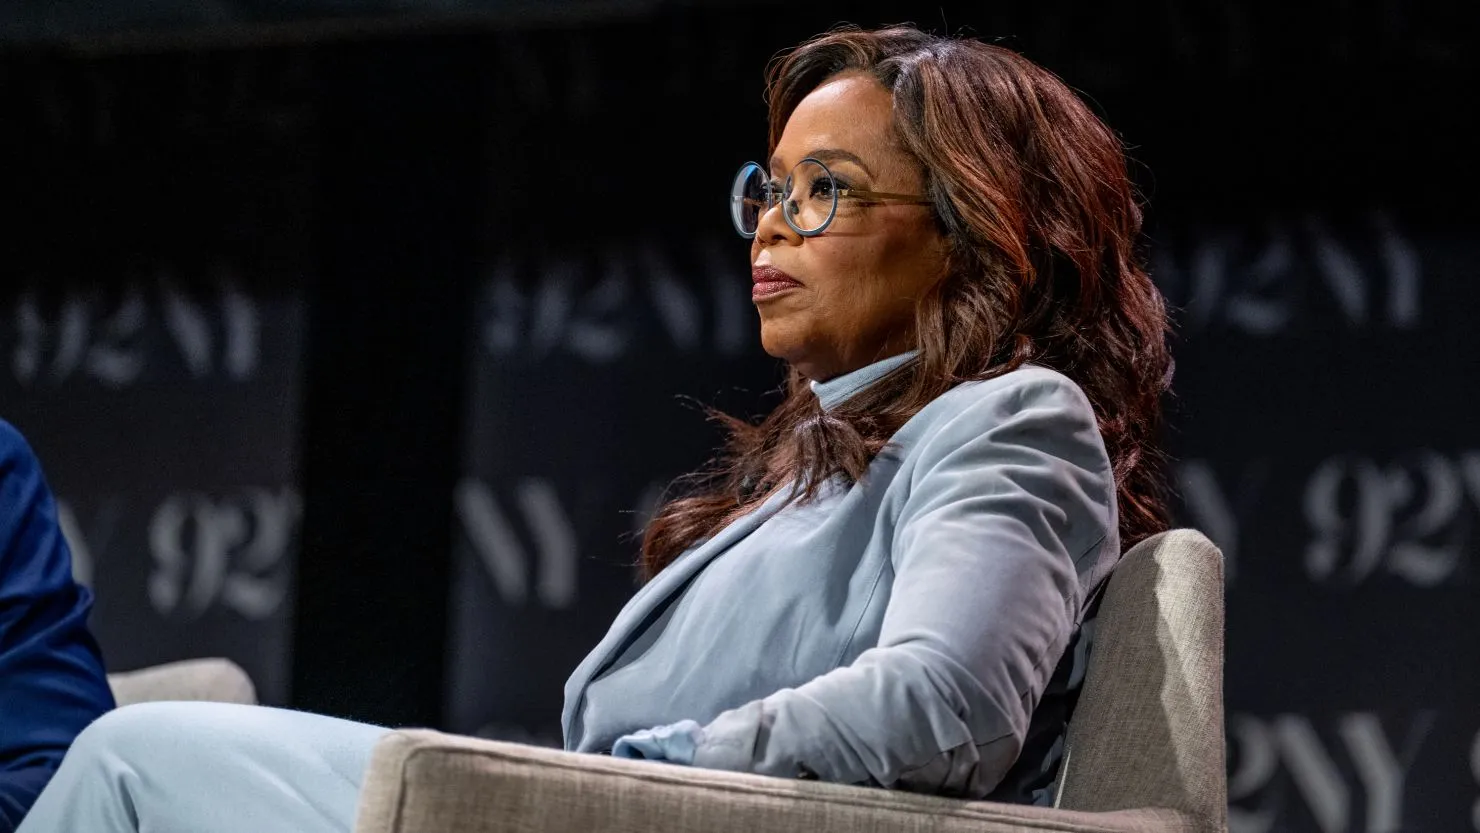 oprah-winfreys-exit-from-weightwatchers-sent-the-companys-shares-tumbling